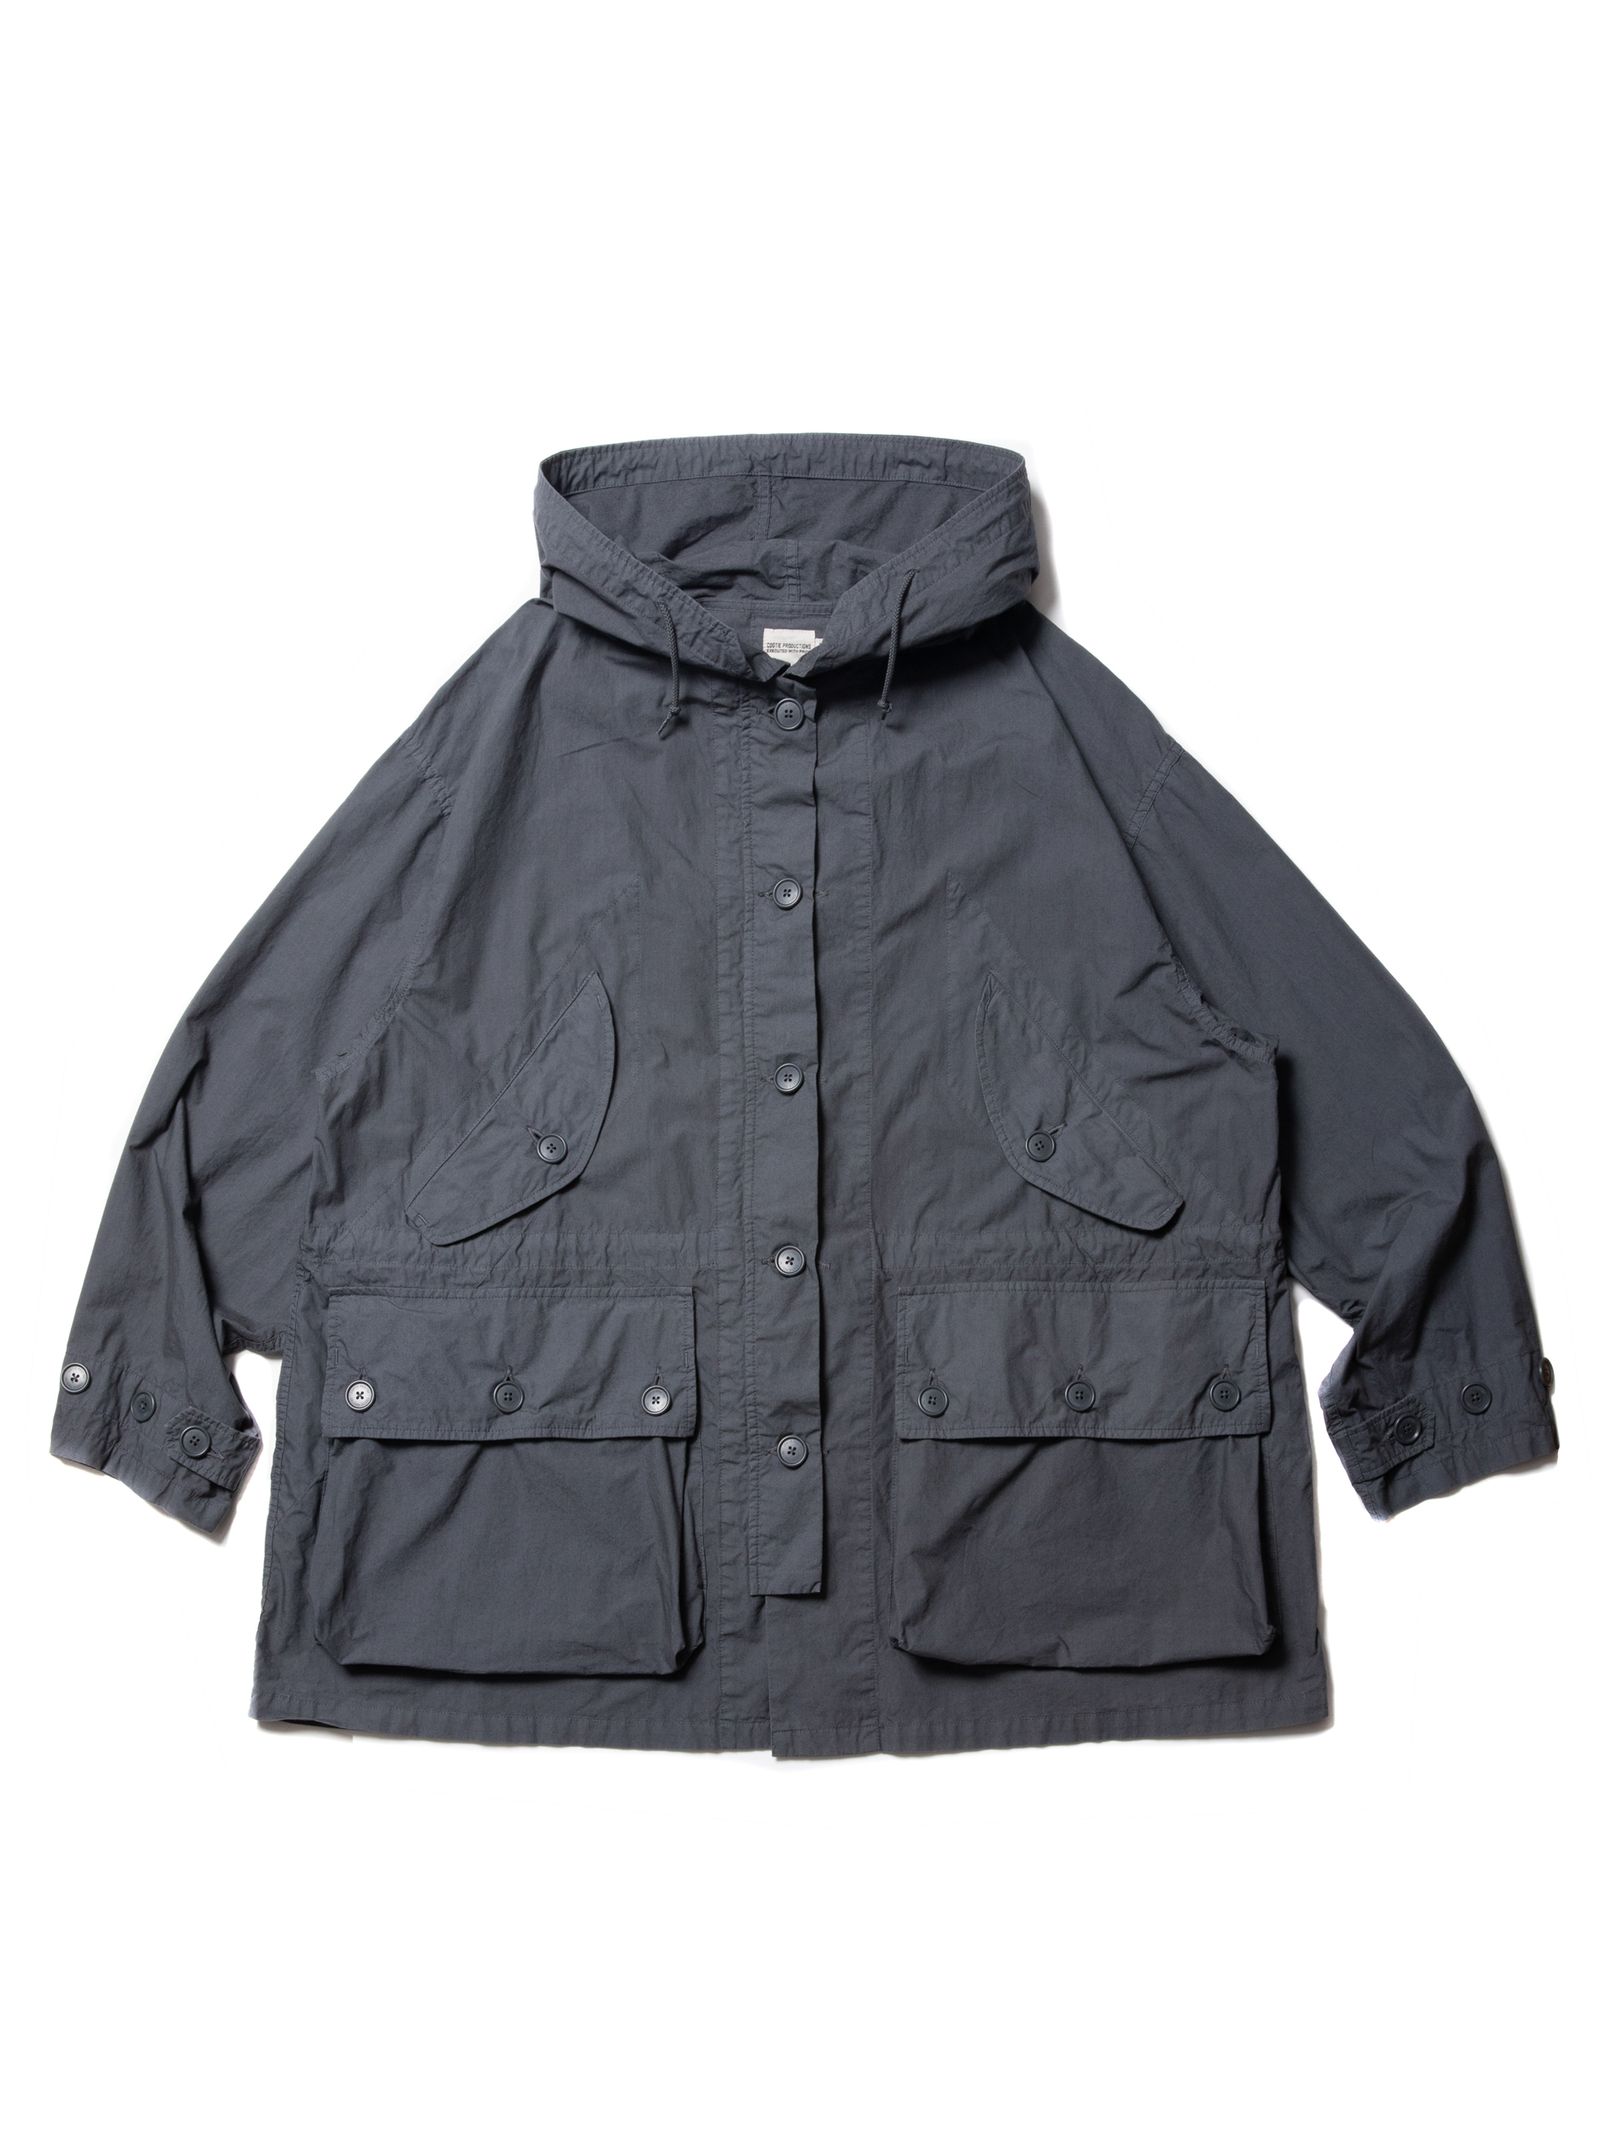 COOTIE PRODUCTIONS - GARMENT DYED UTILITY OVER COAT 